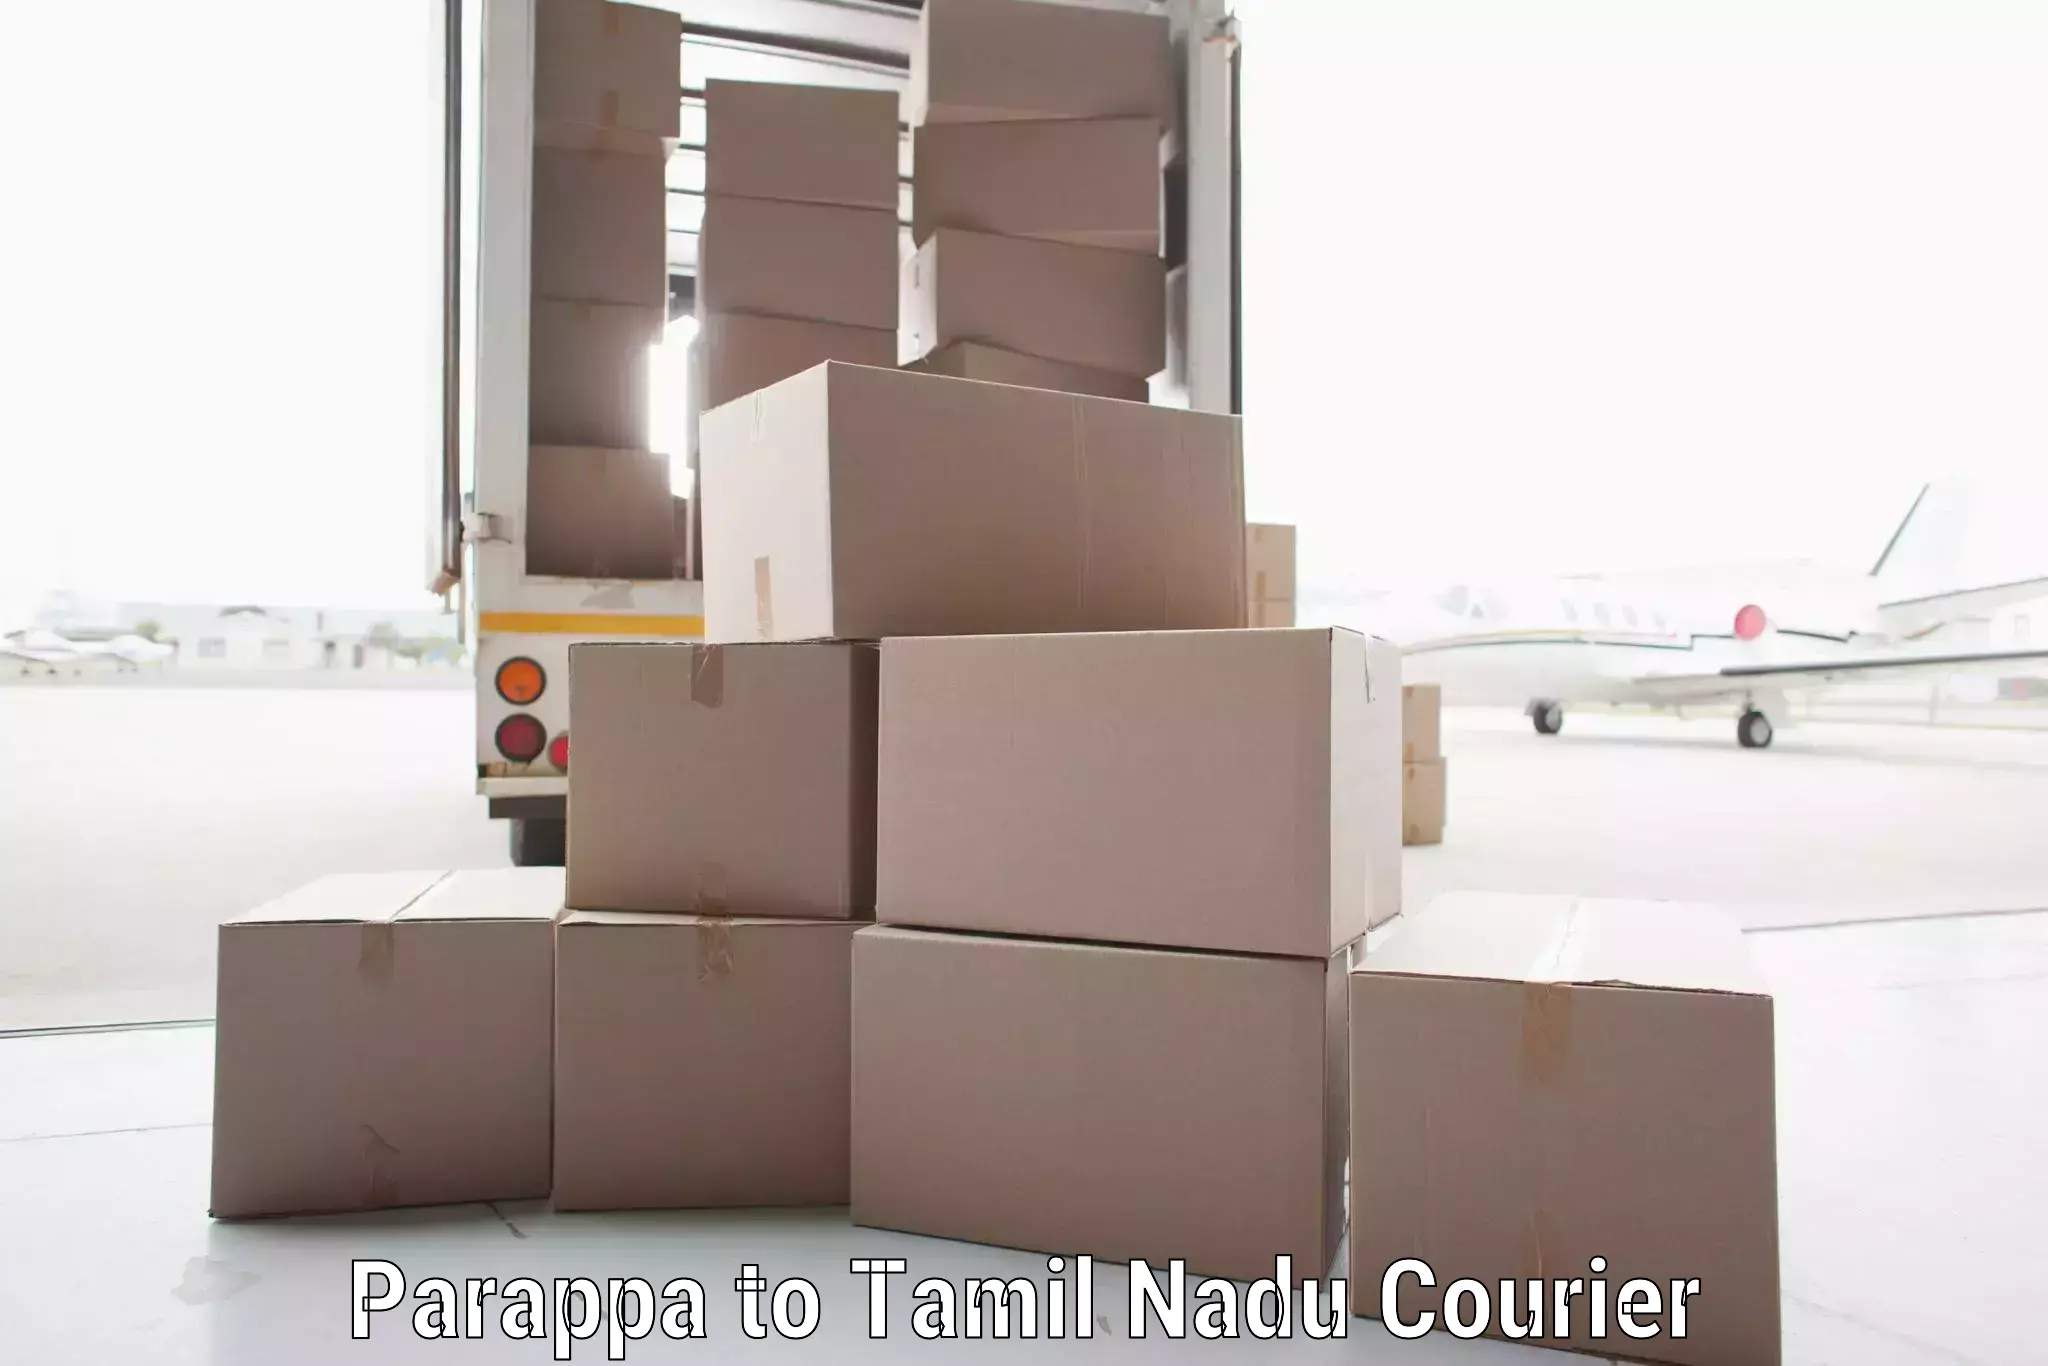 Efficient parcel delivery Parappa to Chennai Port